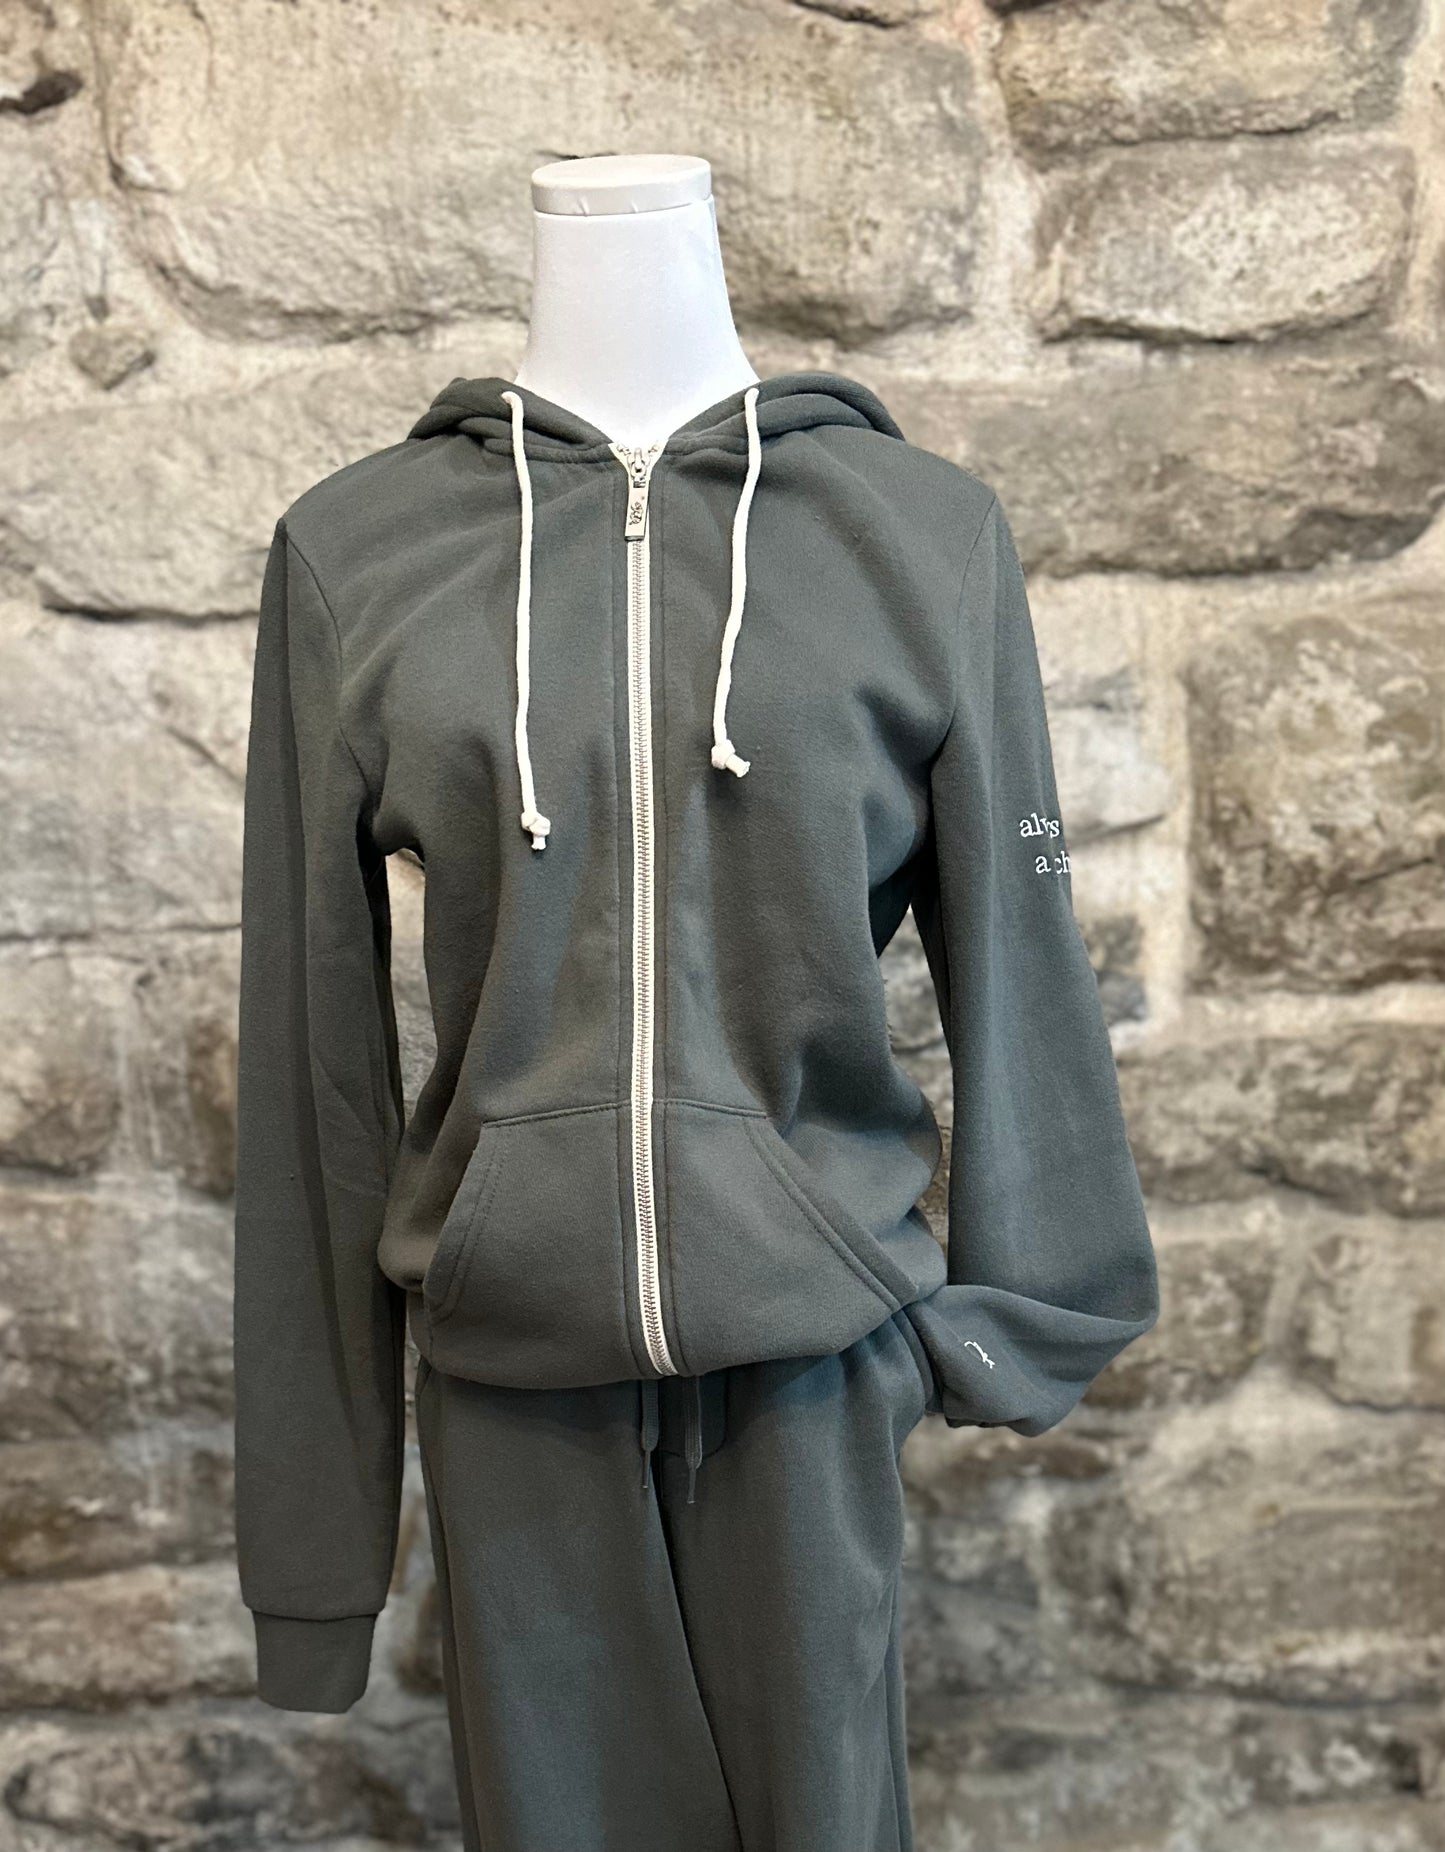 "always be a peach" Zip-up- Olive Green